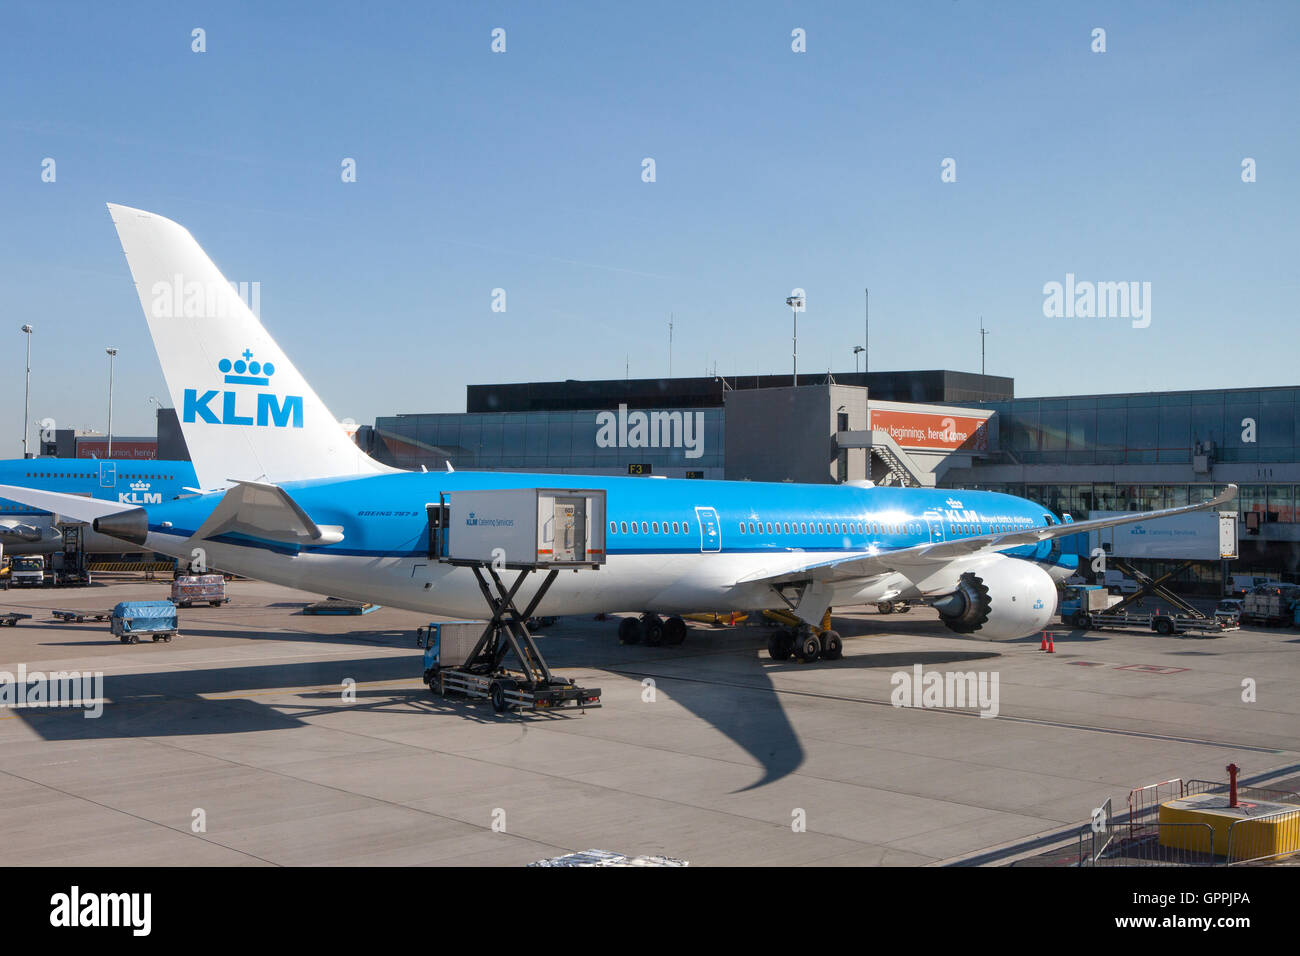 KLM Boeing 747 parked at Amsterdam's Schiphol airport, KLM's home airport. Stock Photo